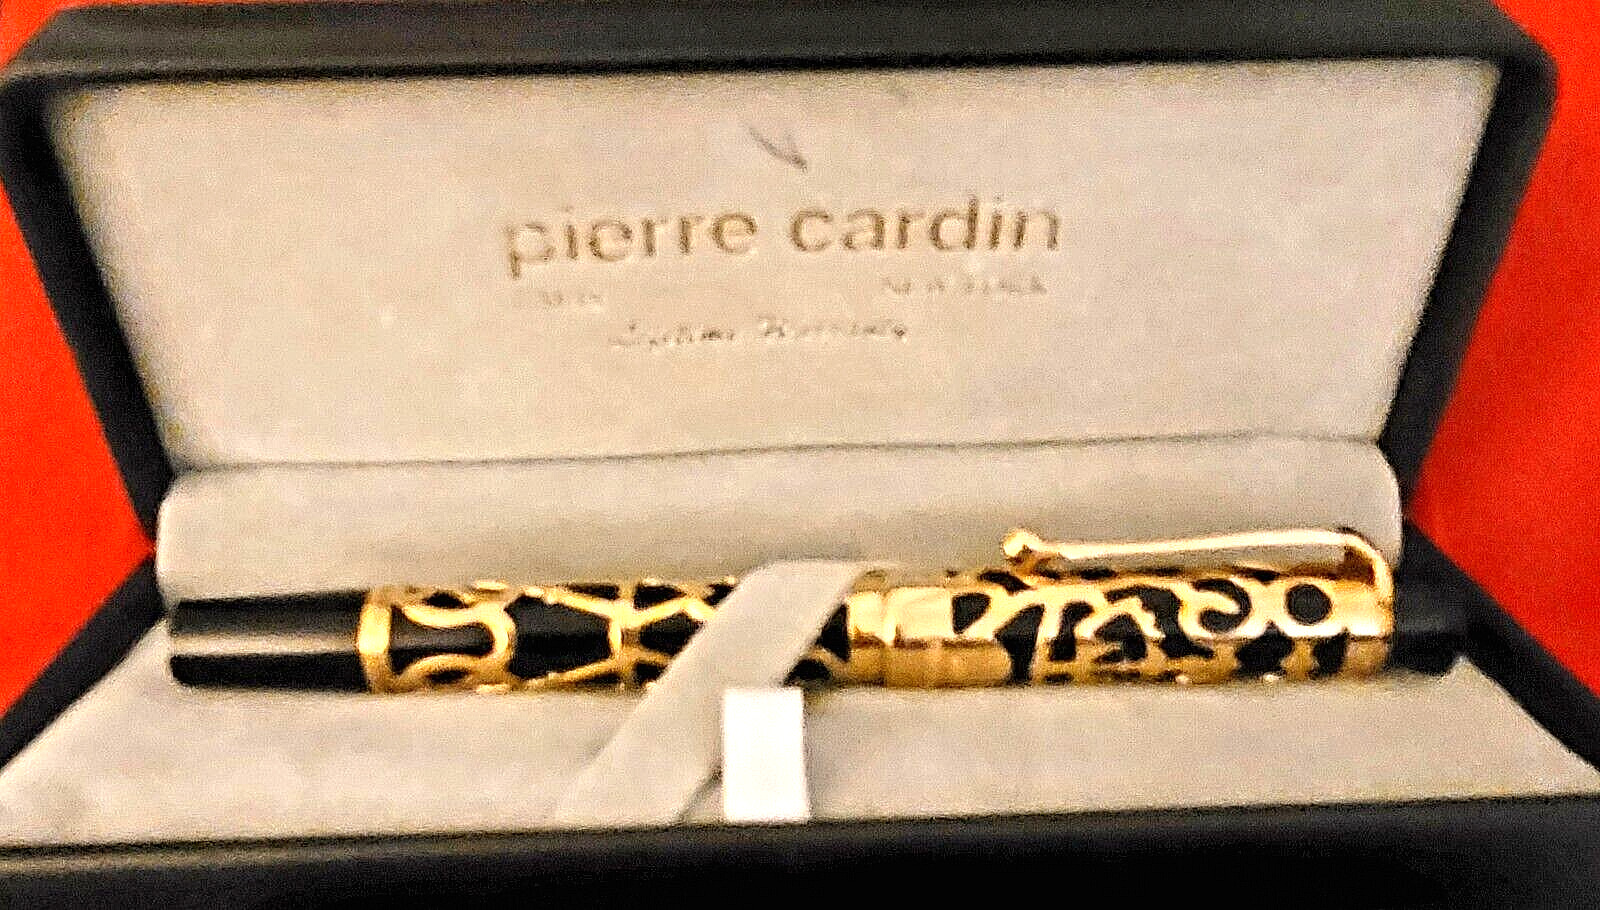 ''THE EMPEROR'' FOUNTAIN PEN BY PIERRE CARDIN. EXCELLENT MINTY CONDITION. IN BOX